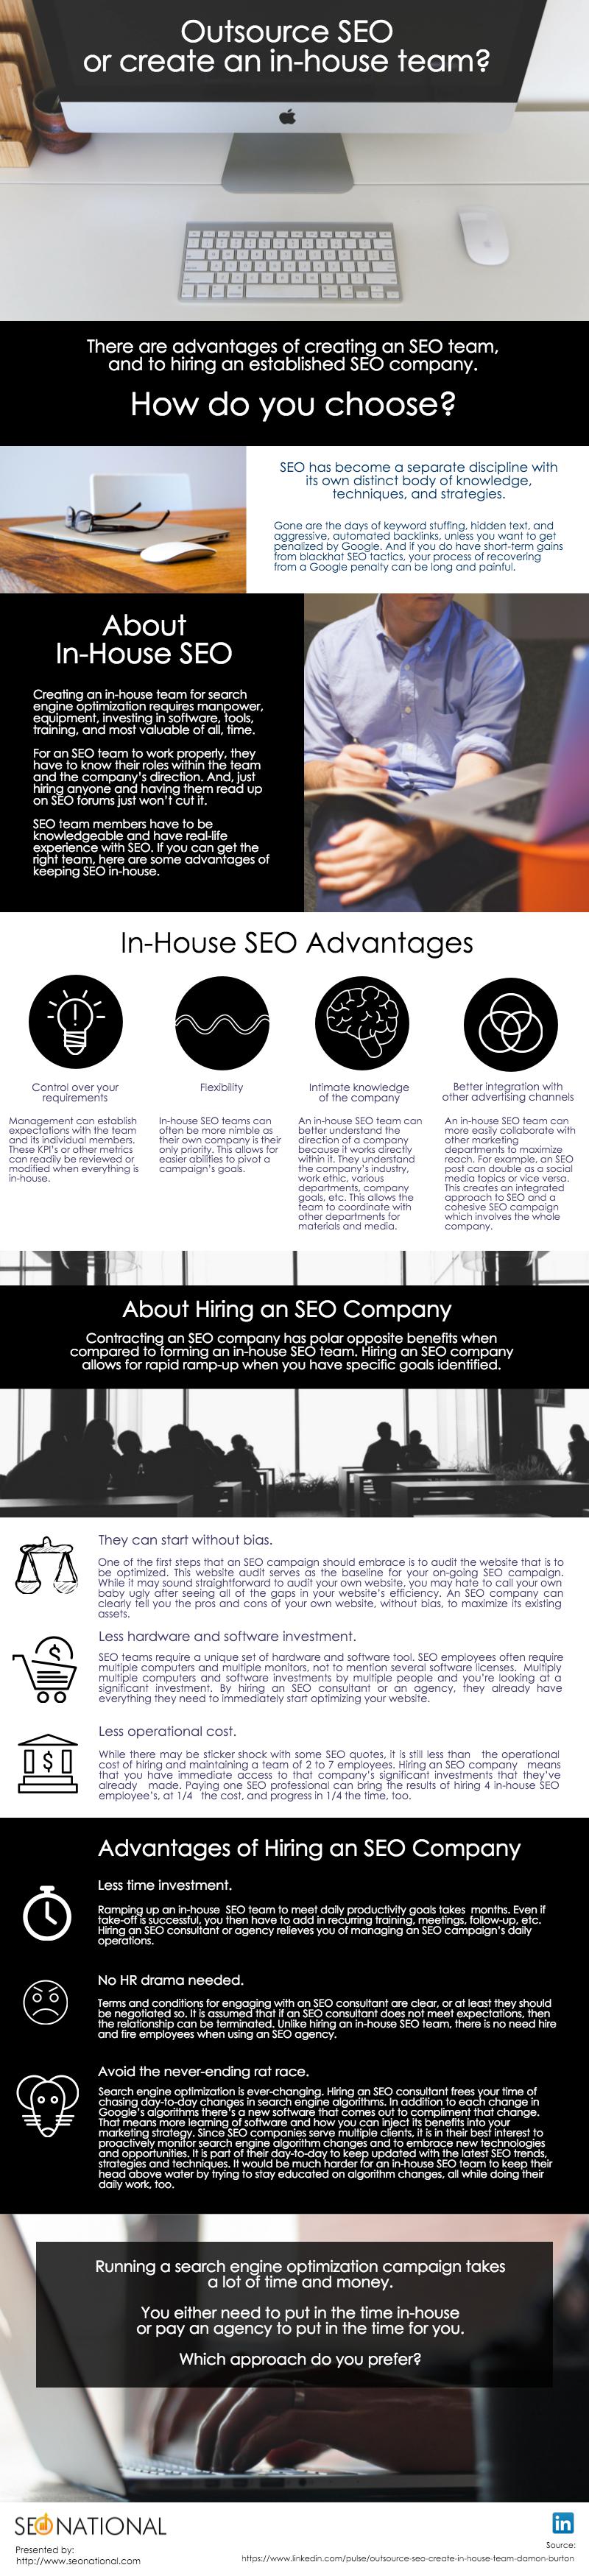 Outsource SEO or Keep In-House? (infographic)